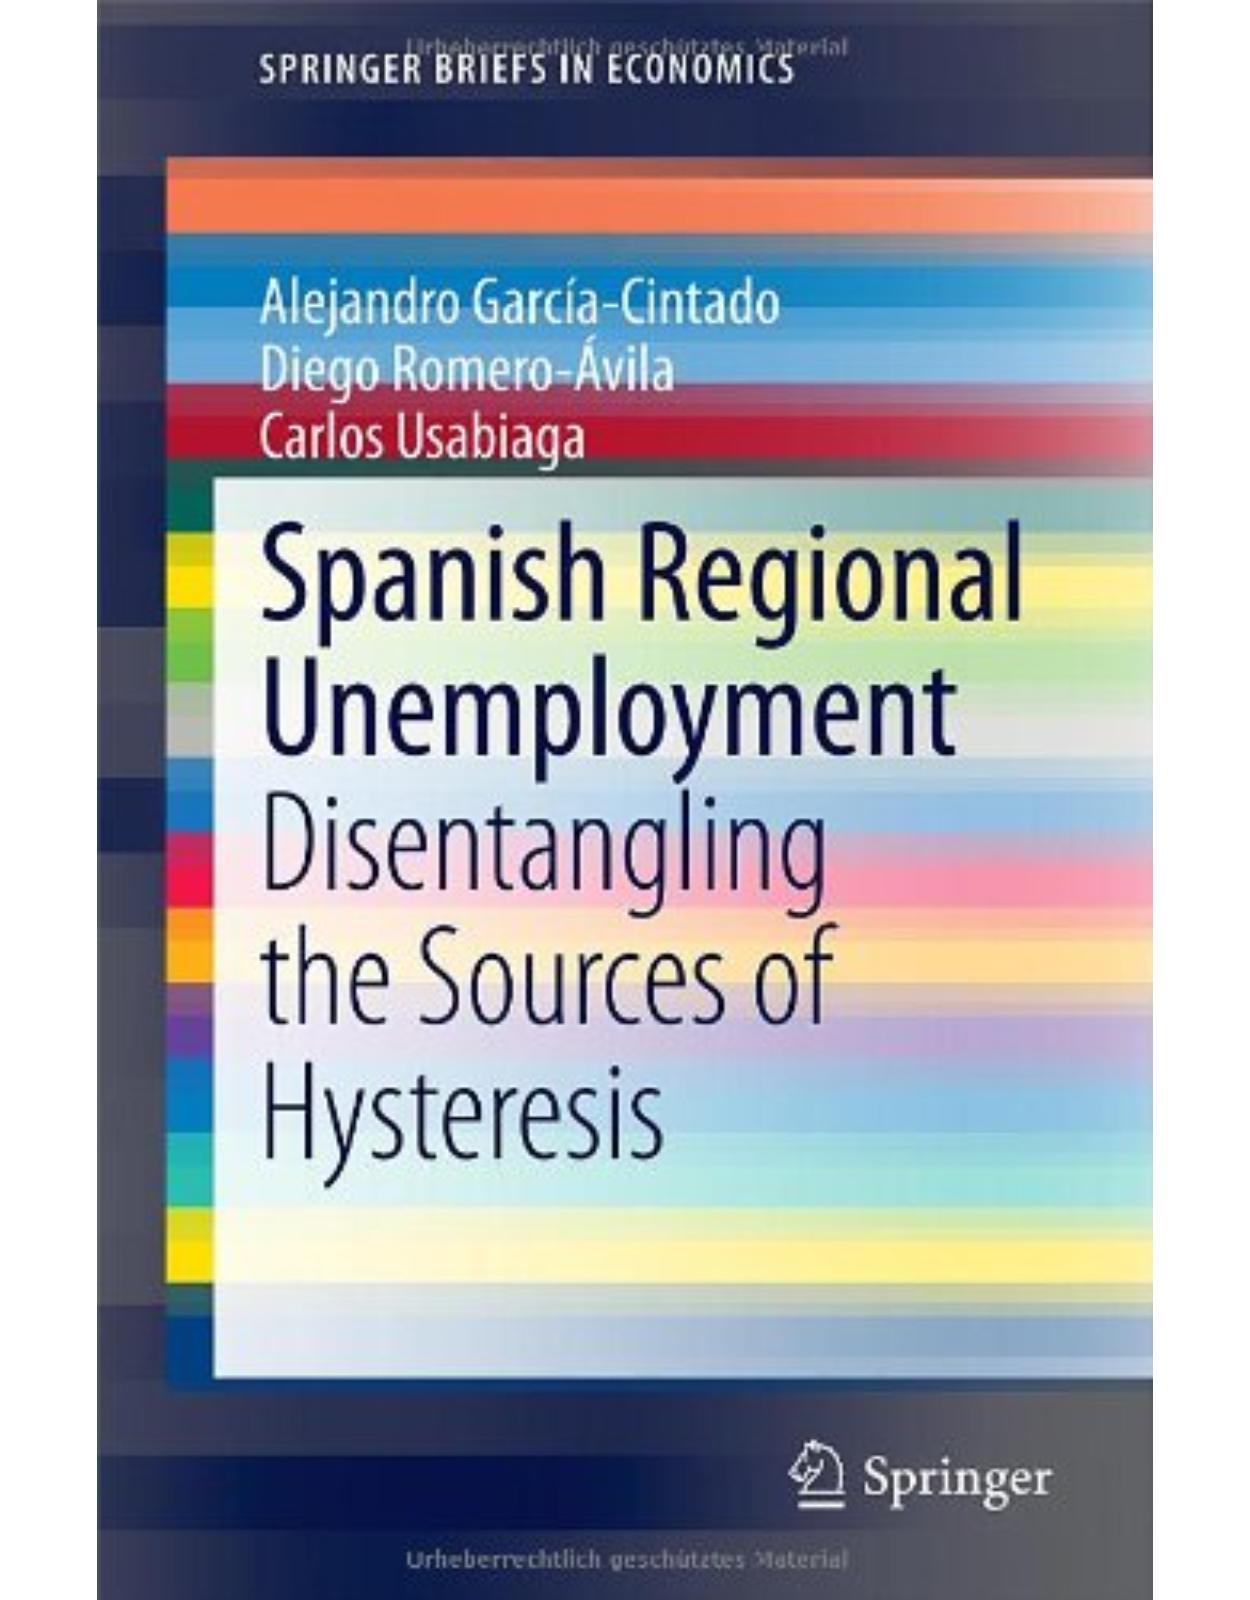 Spanish Regional Unemployment: Disentangling the Sources of Hysteresis (SpringerBriefs in Economics)